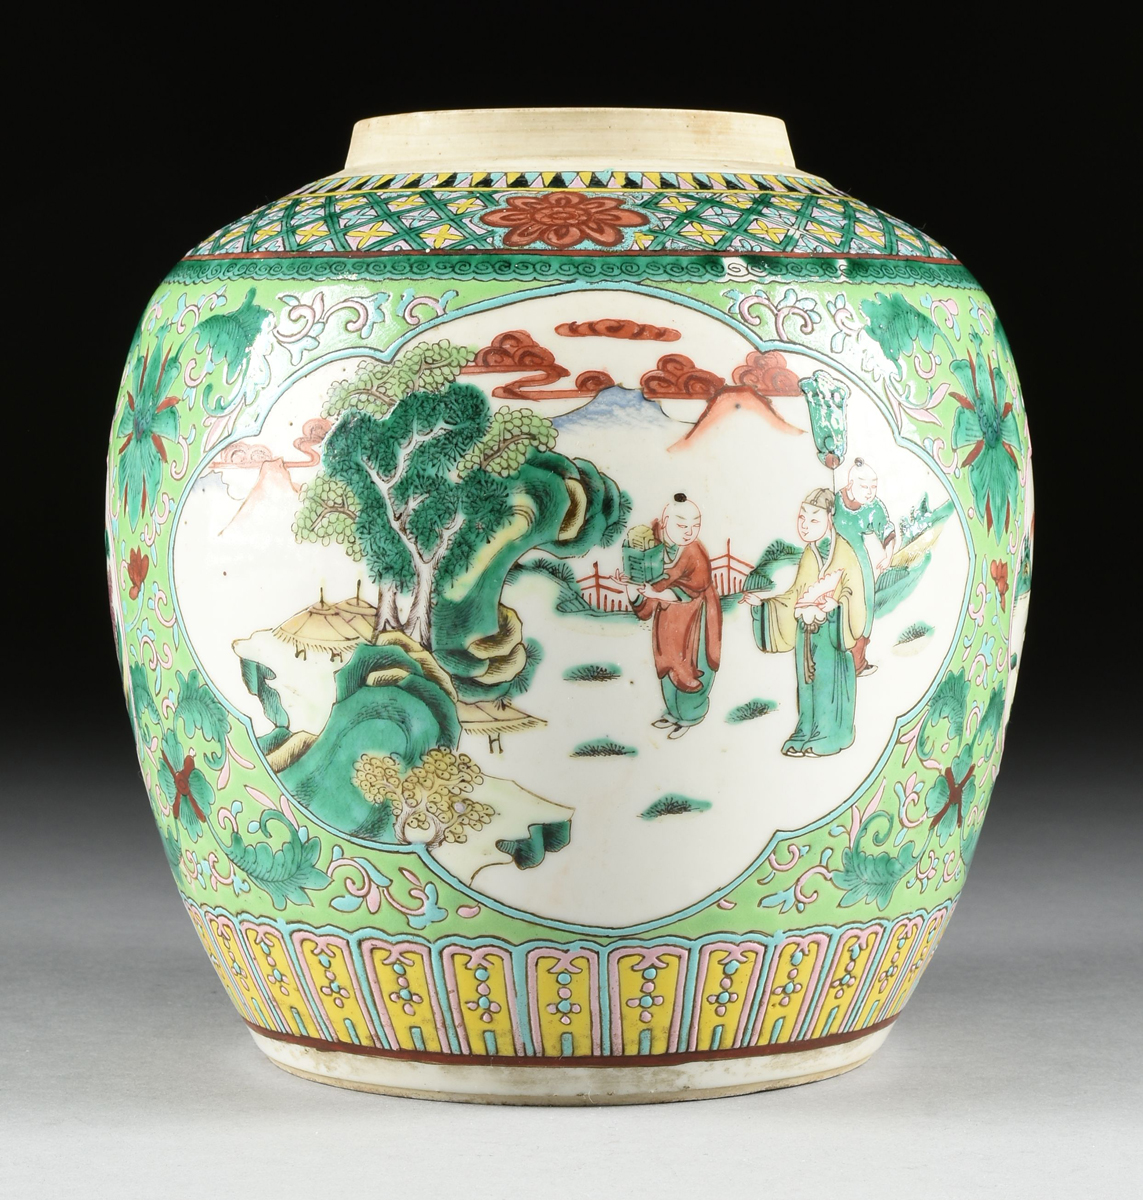 A PAIR OF CHINESE "FAMILLE VERTE" PORCELAIN GINGER JARS WITH LIDS, REPUBLIC PERIOD CIRCA 1917- - Image 10 of 14